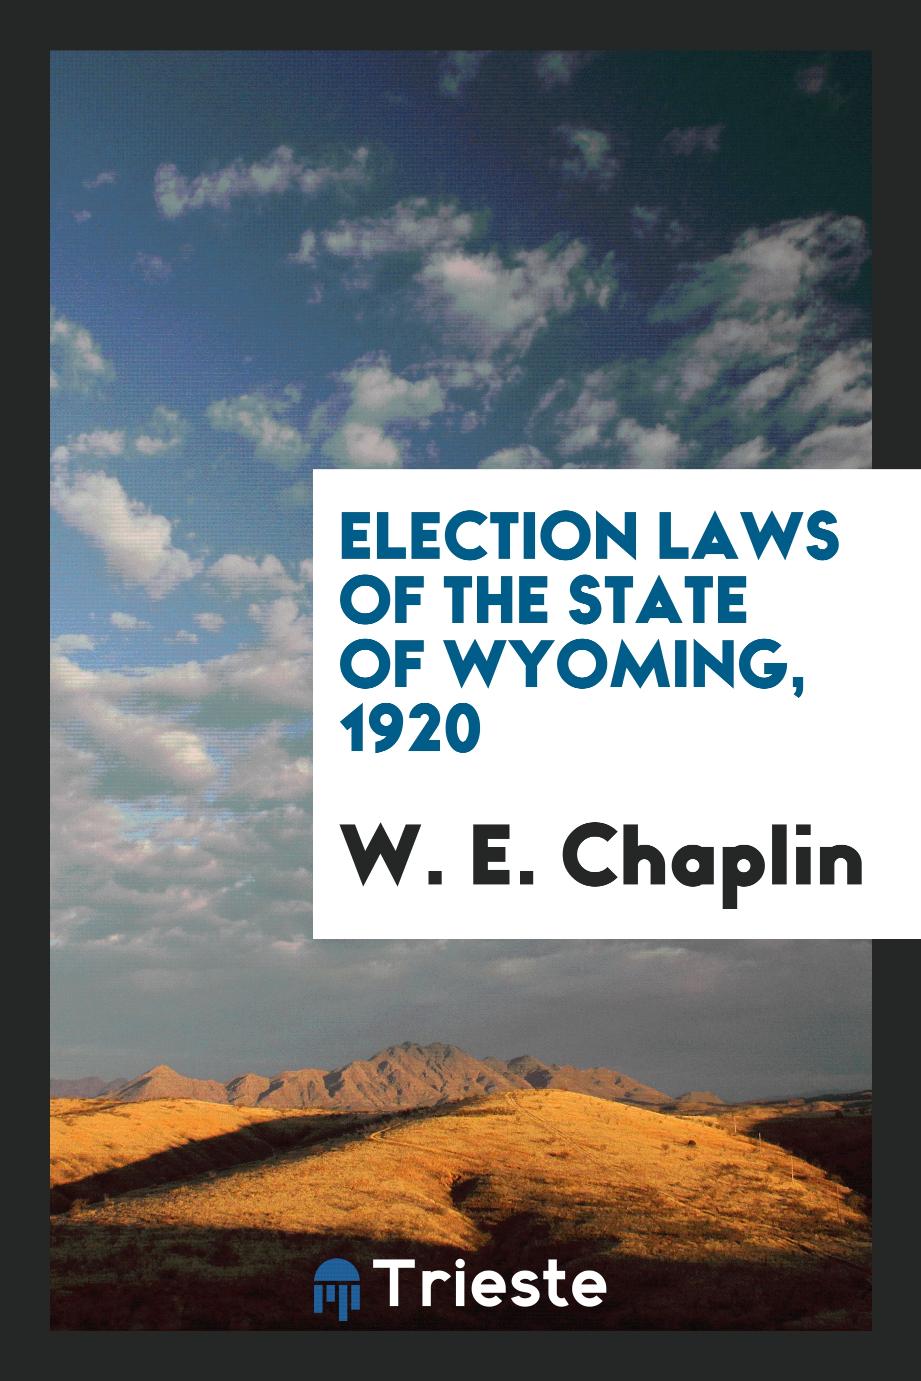 Election Laws of the State of Wyoming, 1920